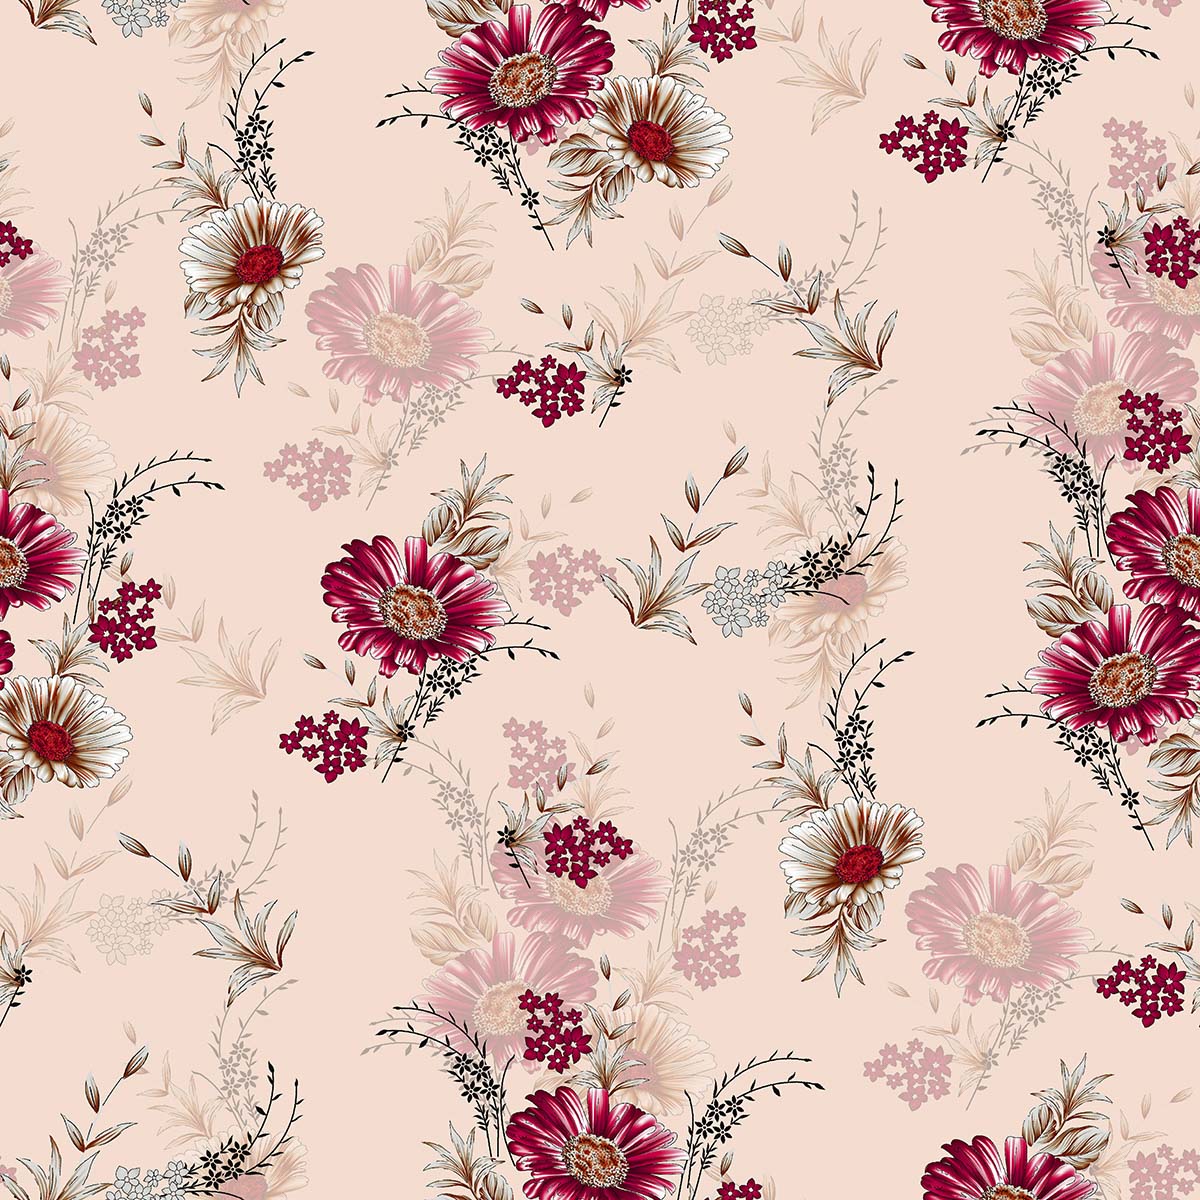 A pattern of flowers on a pink background